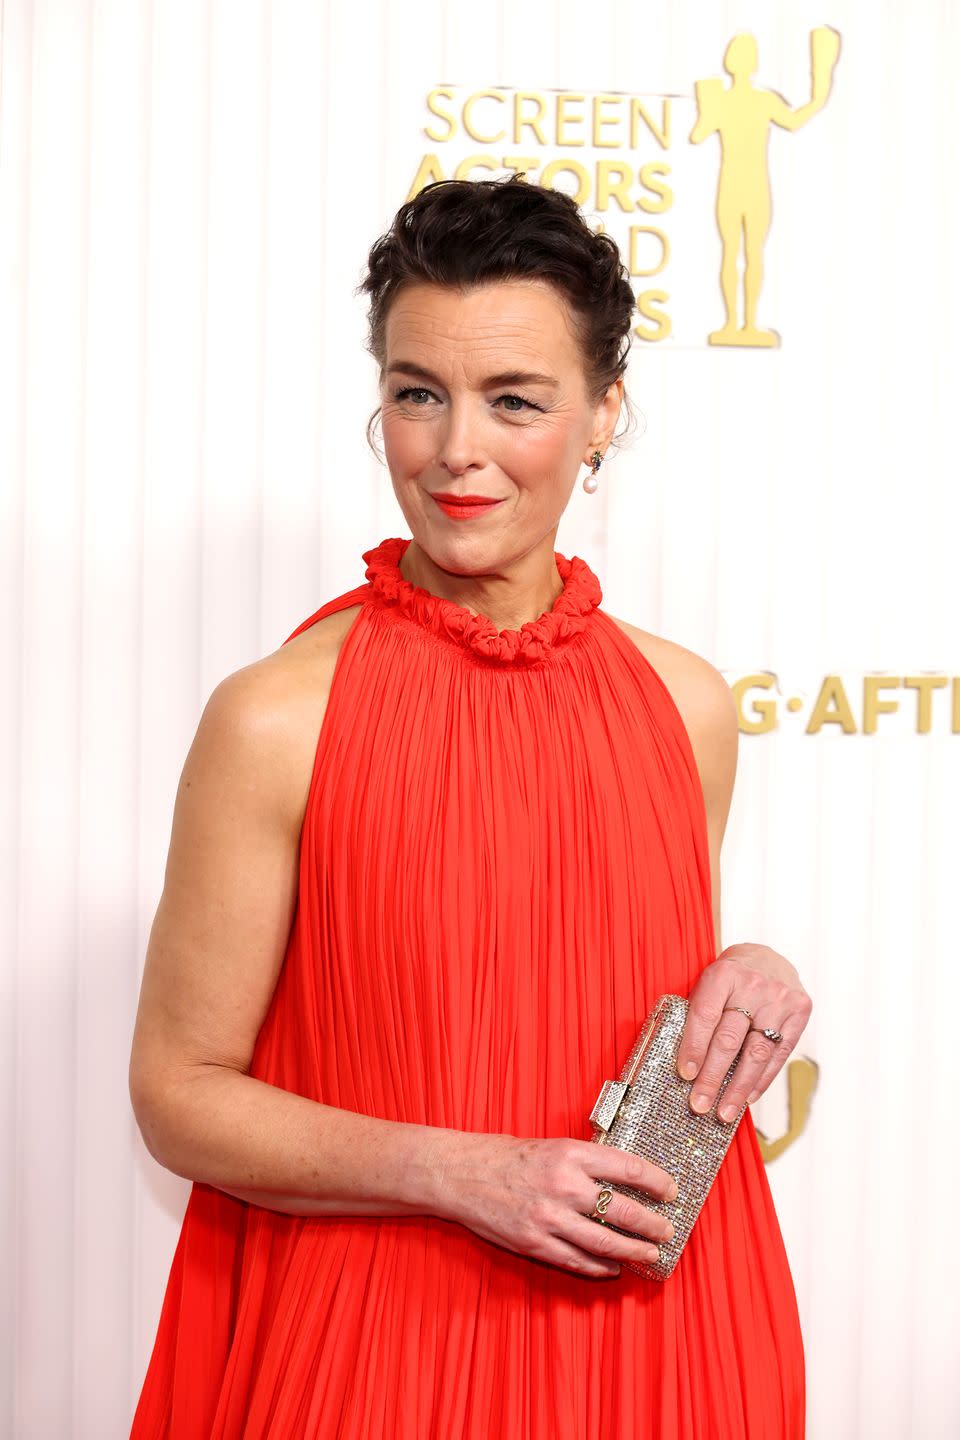 olivia williams attends the 29th annual screen actors guild awards in a light red dress and shiny purse